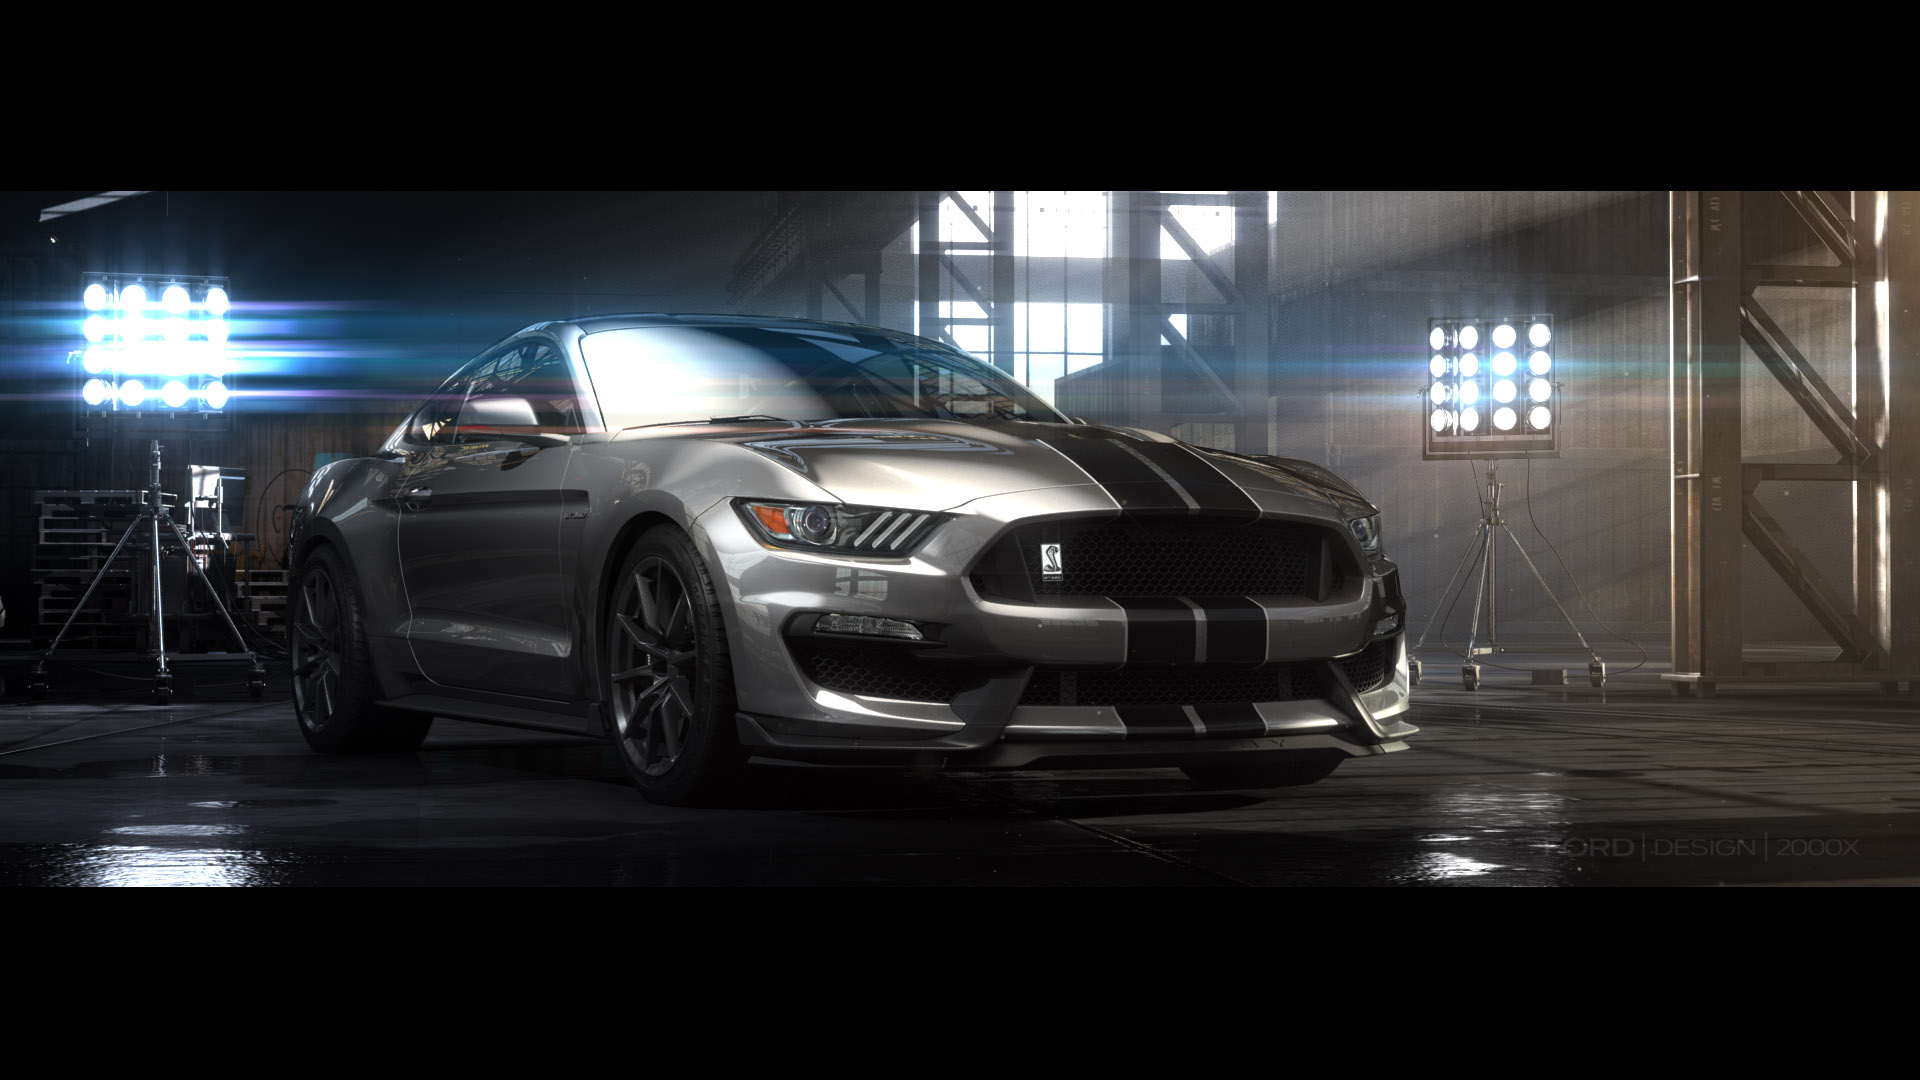 Ford Shelby GT350 Mustang